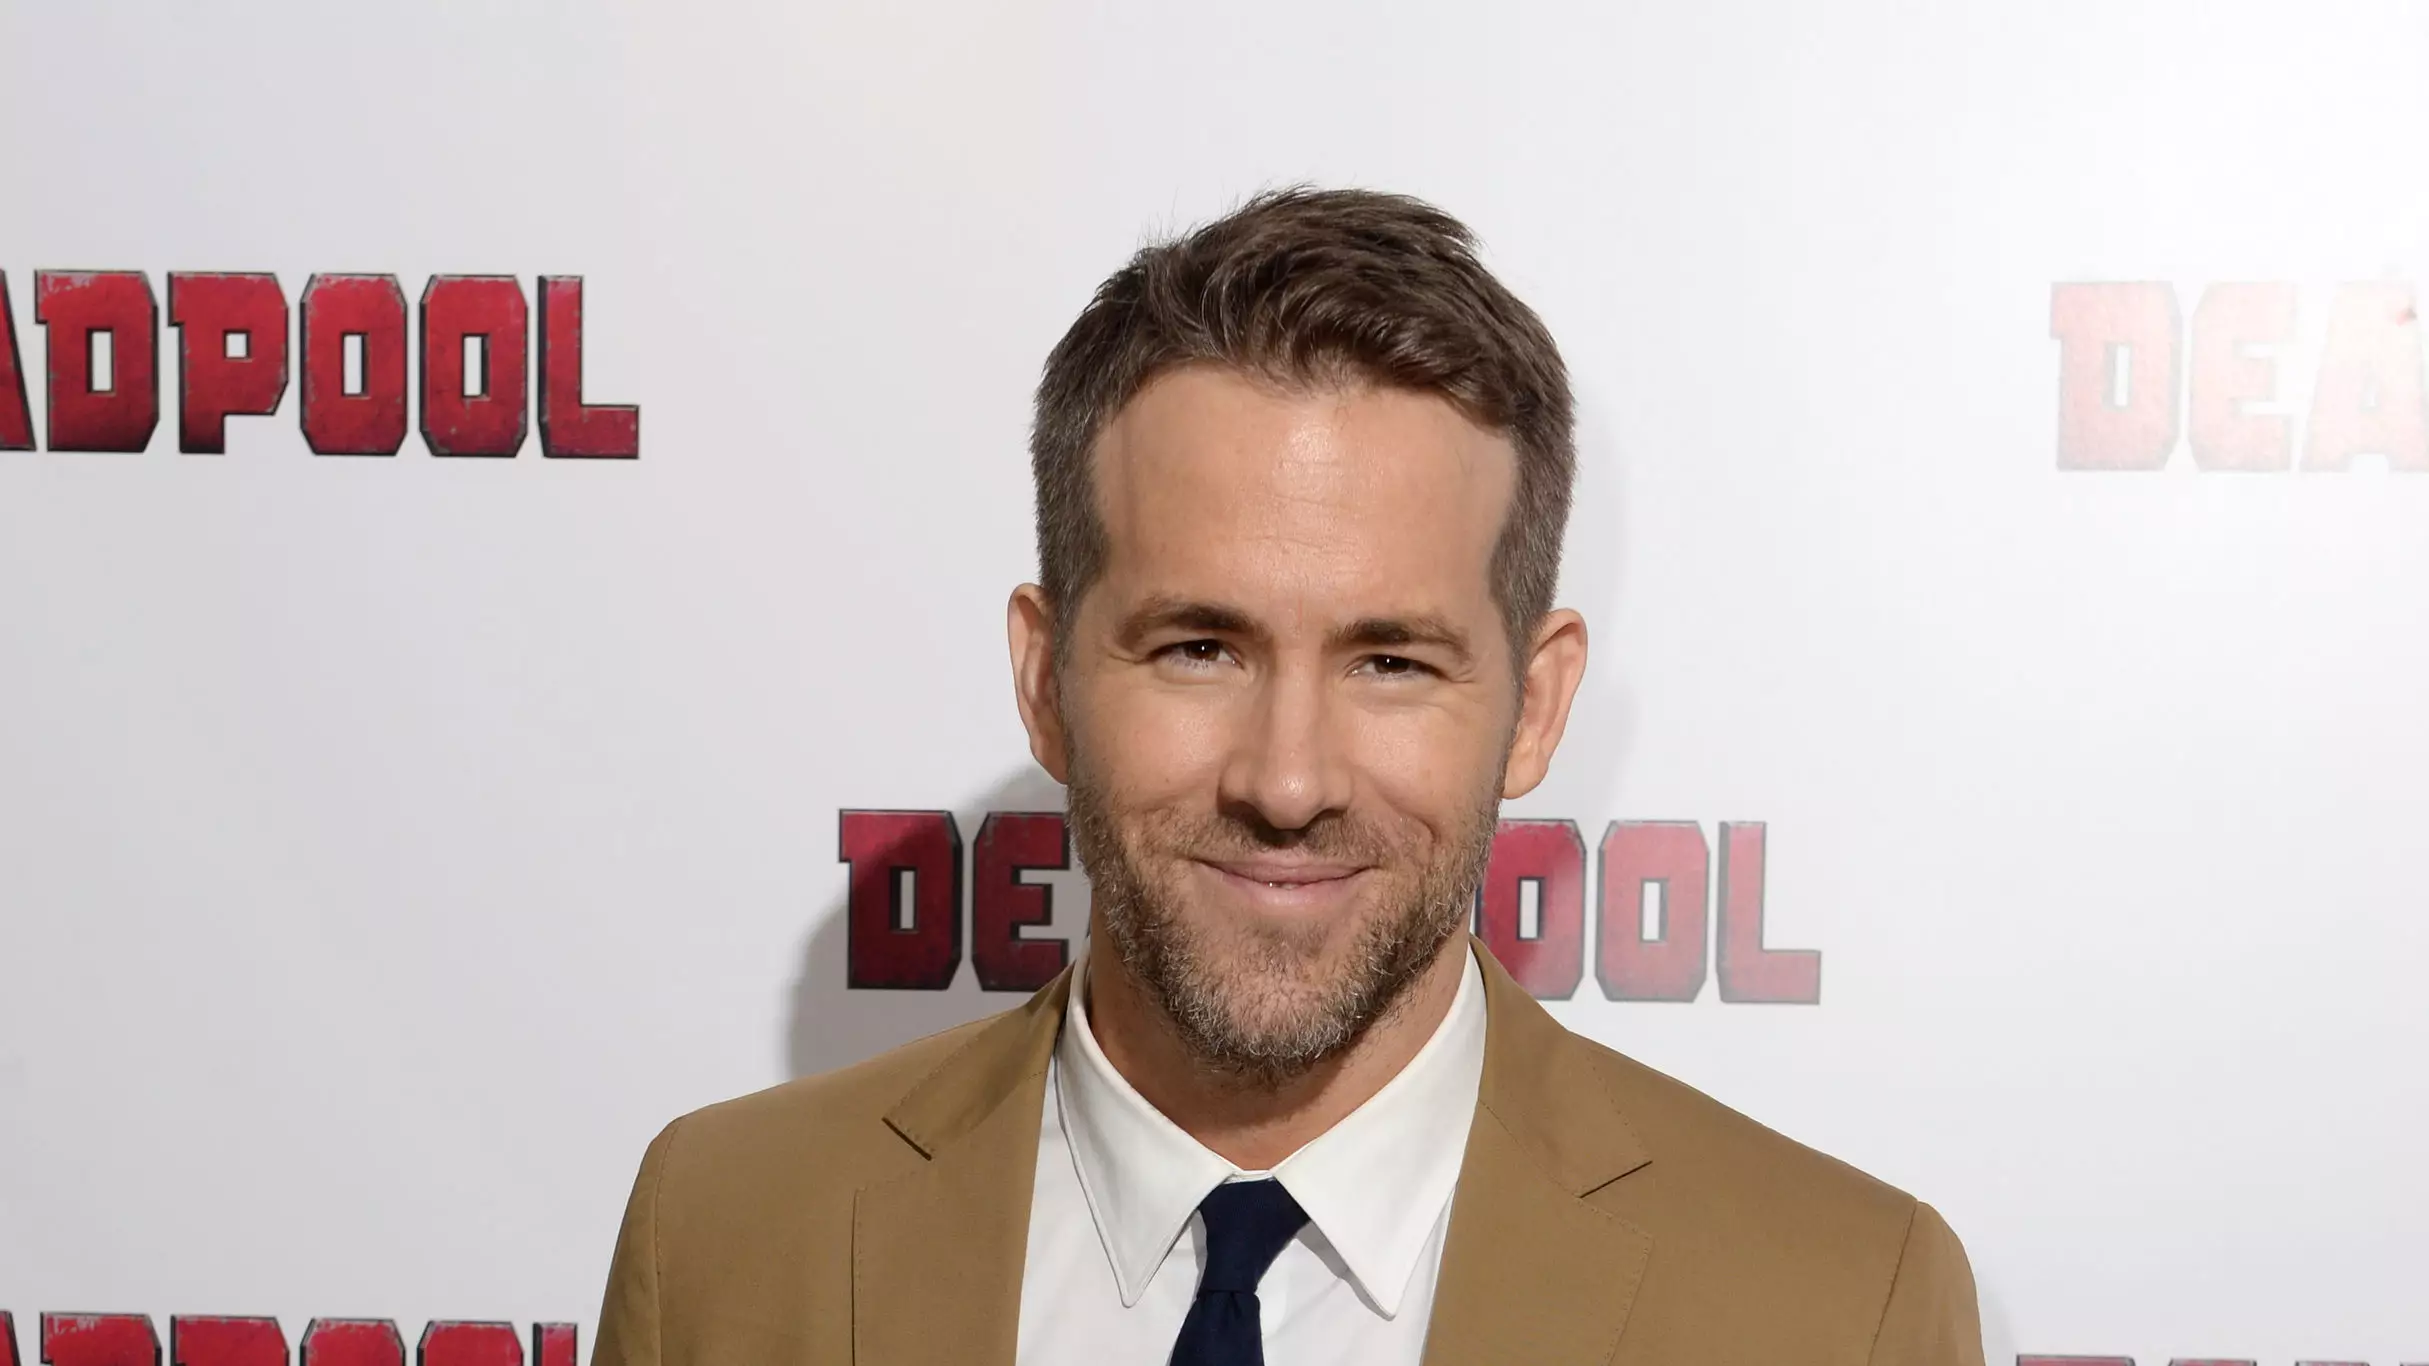 Who Is Ryan Reynolds? What Movies Has He Been In? Who Is His Wife?